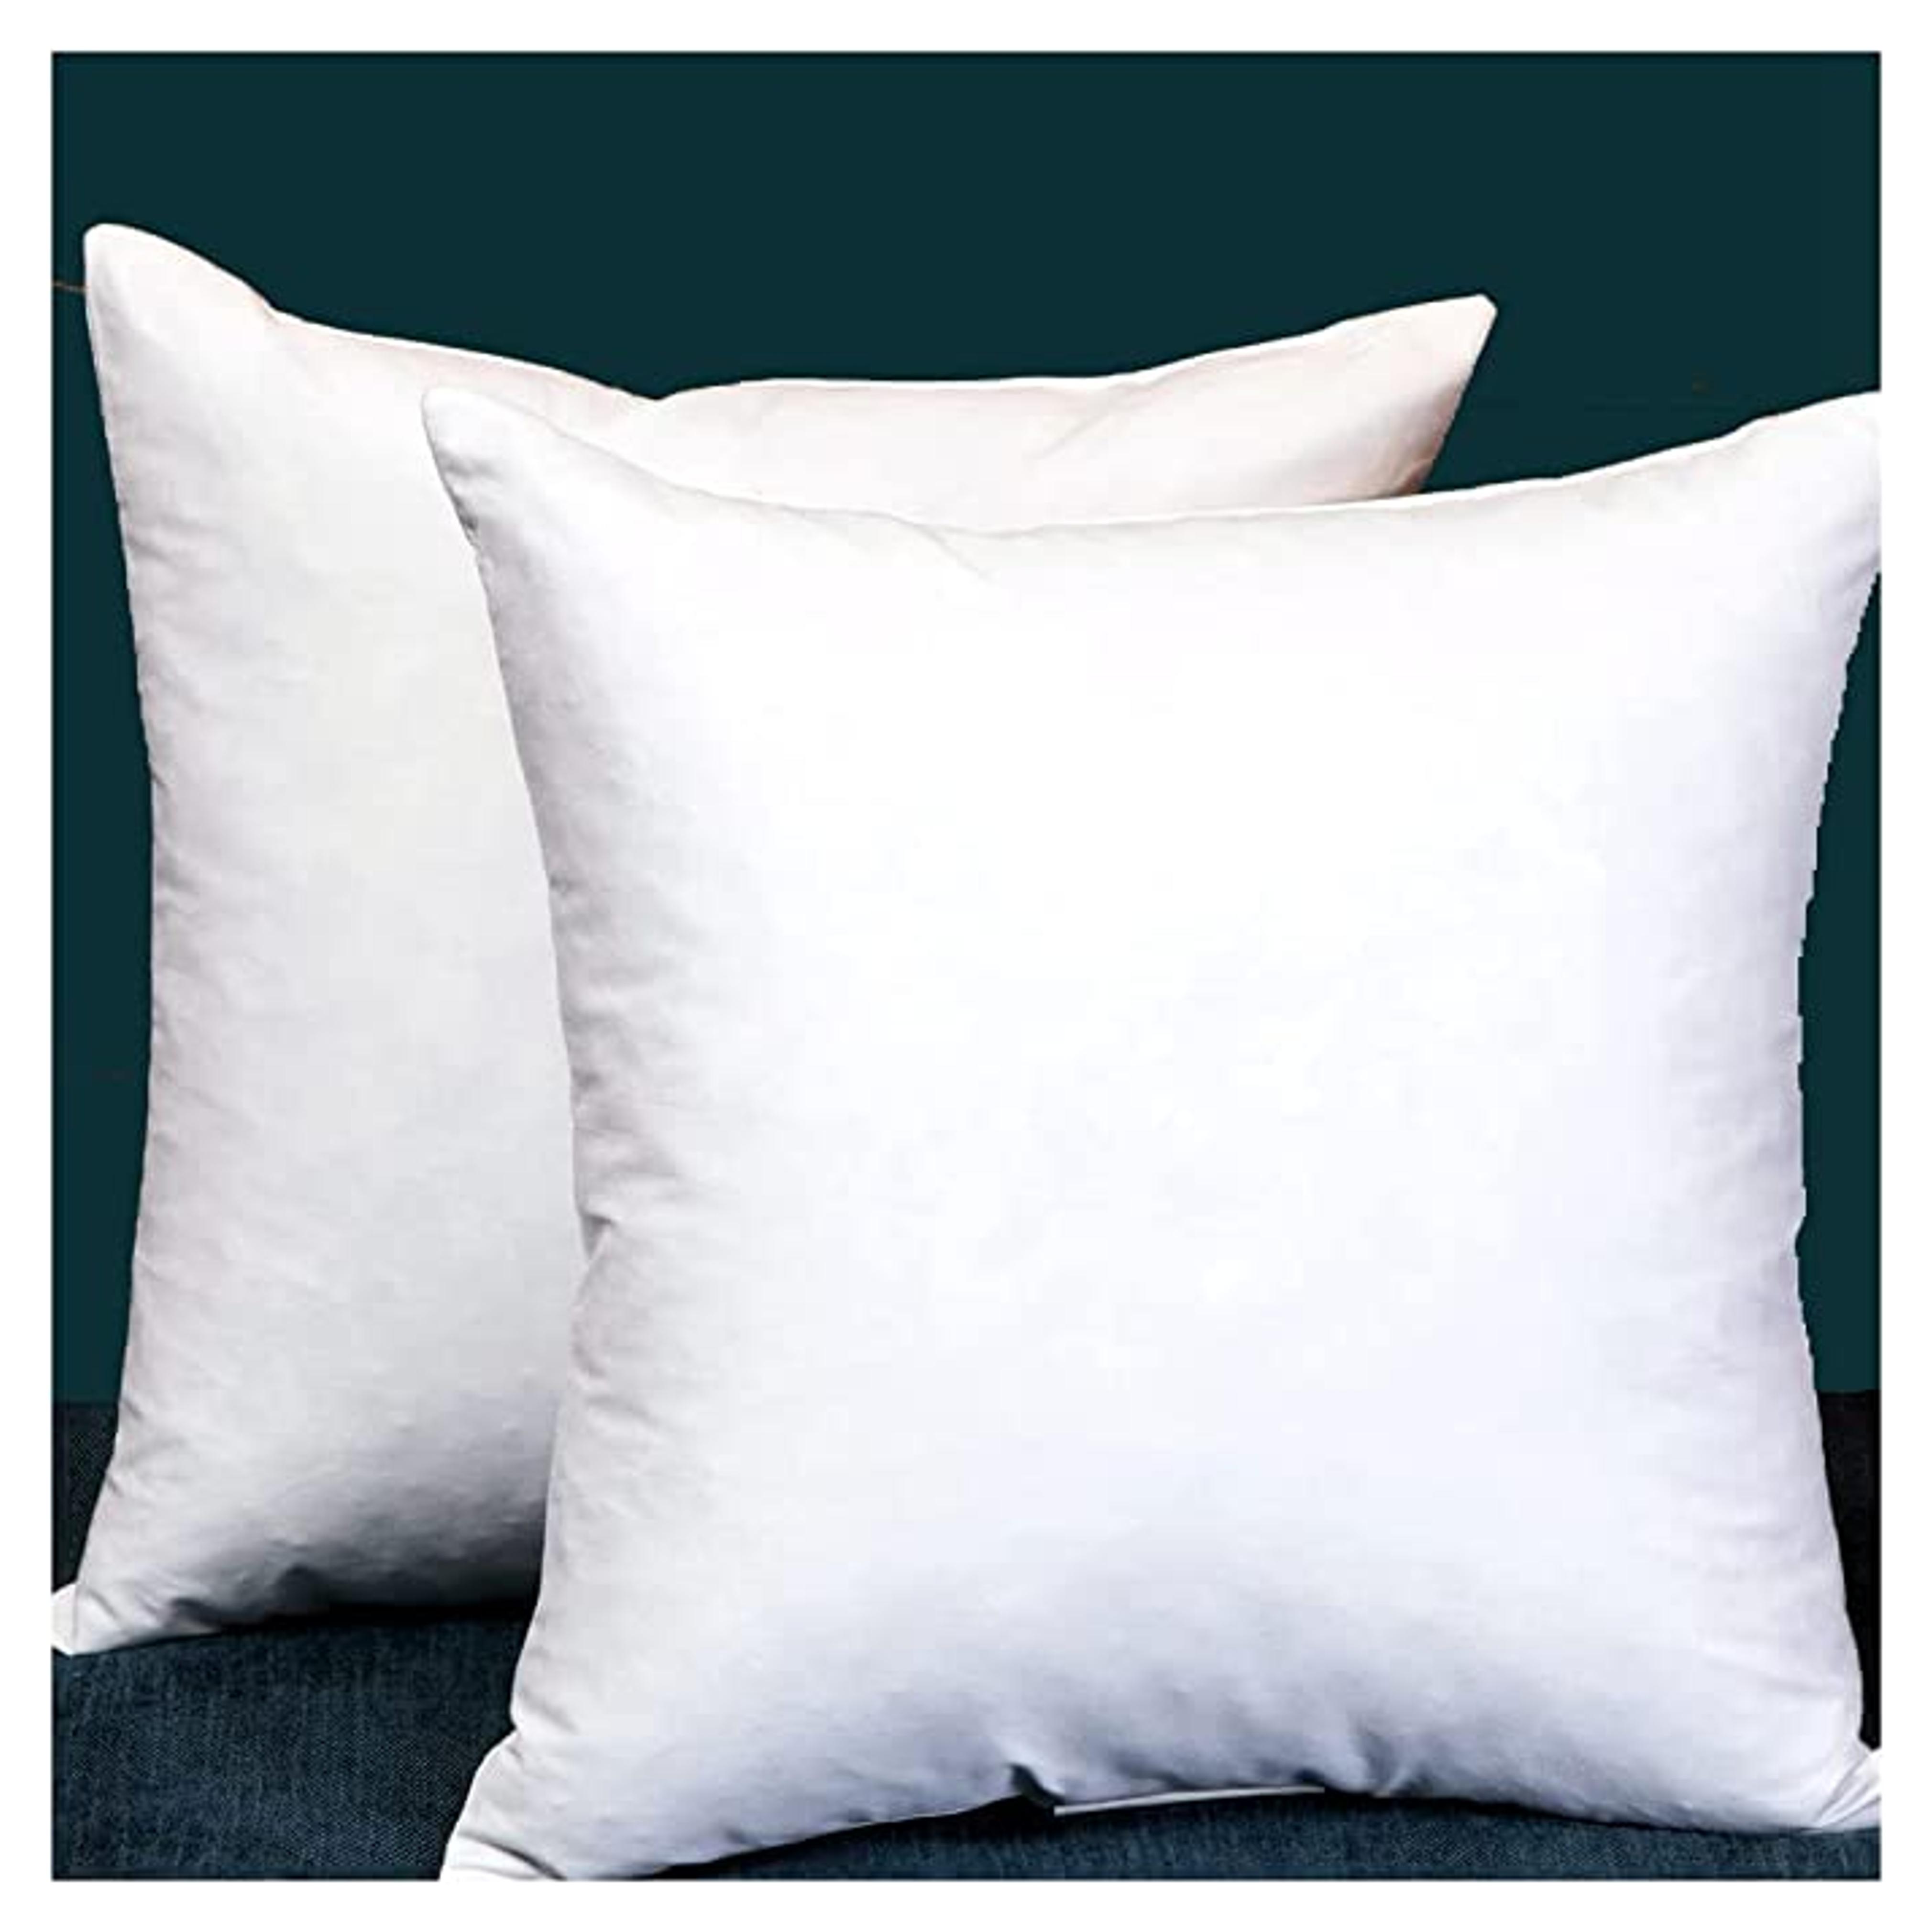 Amazon.com: Set of 2, Square Decorative Throw Pillows Inserts Down and Feather Pillow Insert, Cotton Fabric, 26 X 26 Inches : Home & Kitchen